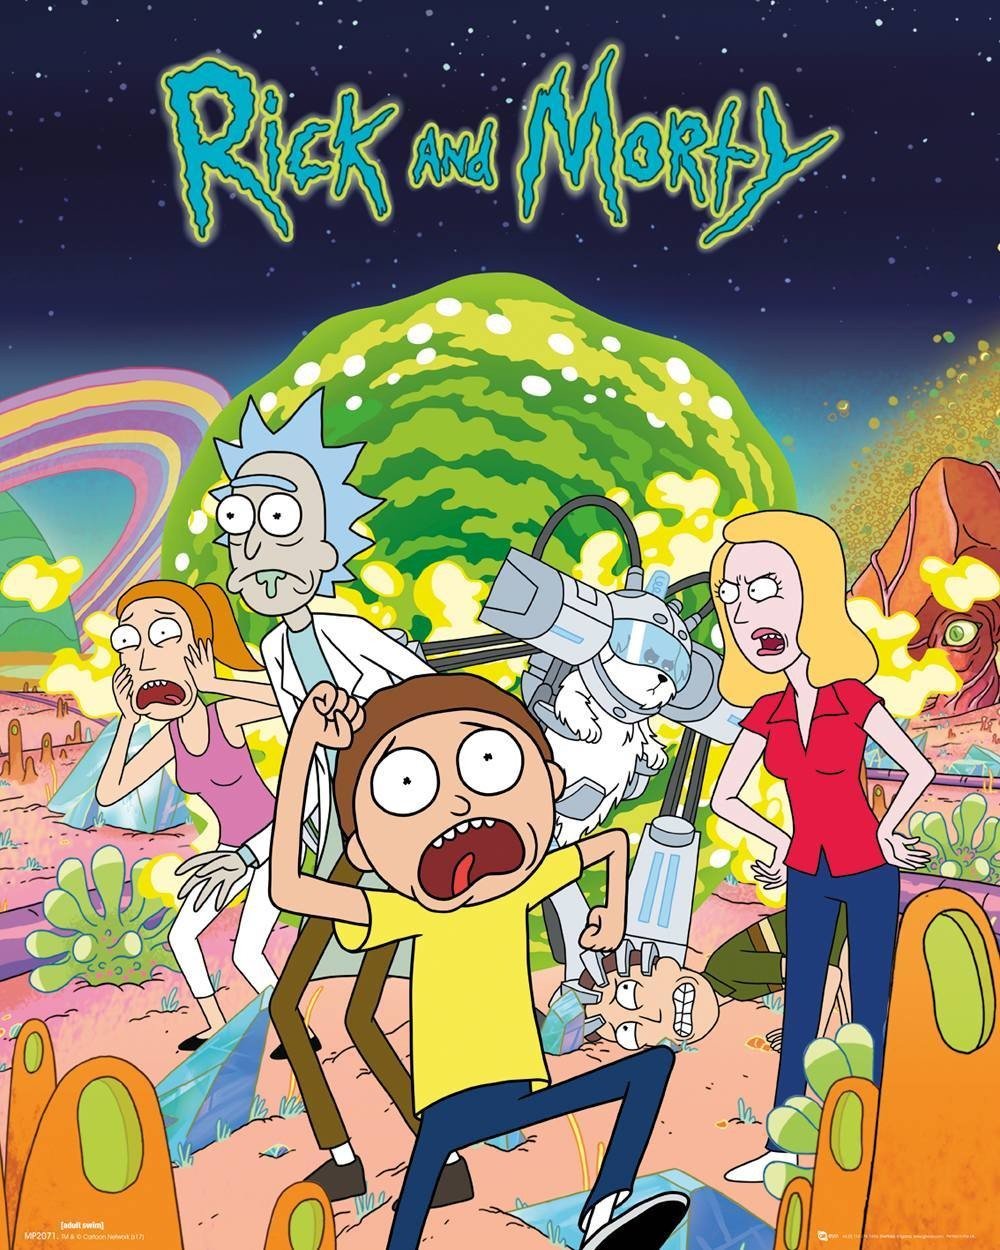 https://cinepop.com.br/wp-content/uploads/2019/07/rick-and-morty-group-mini-poster-1.133.jpg